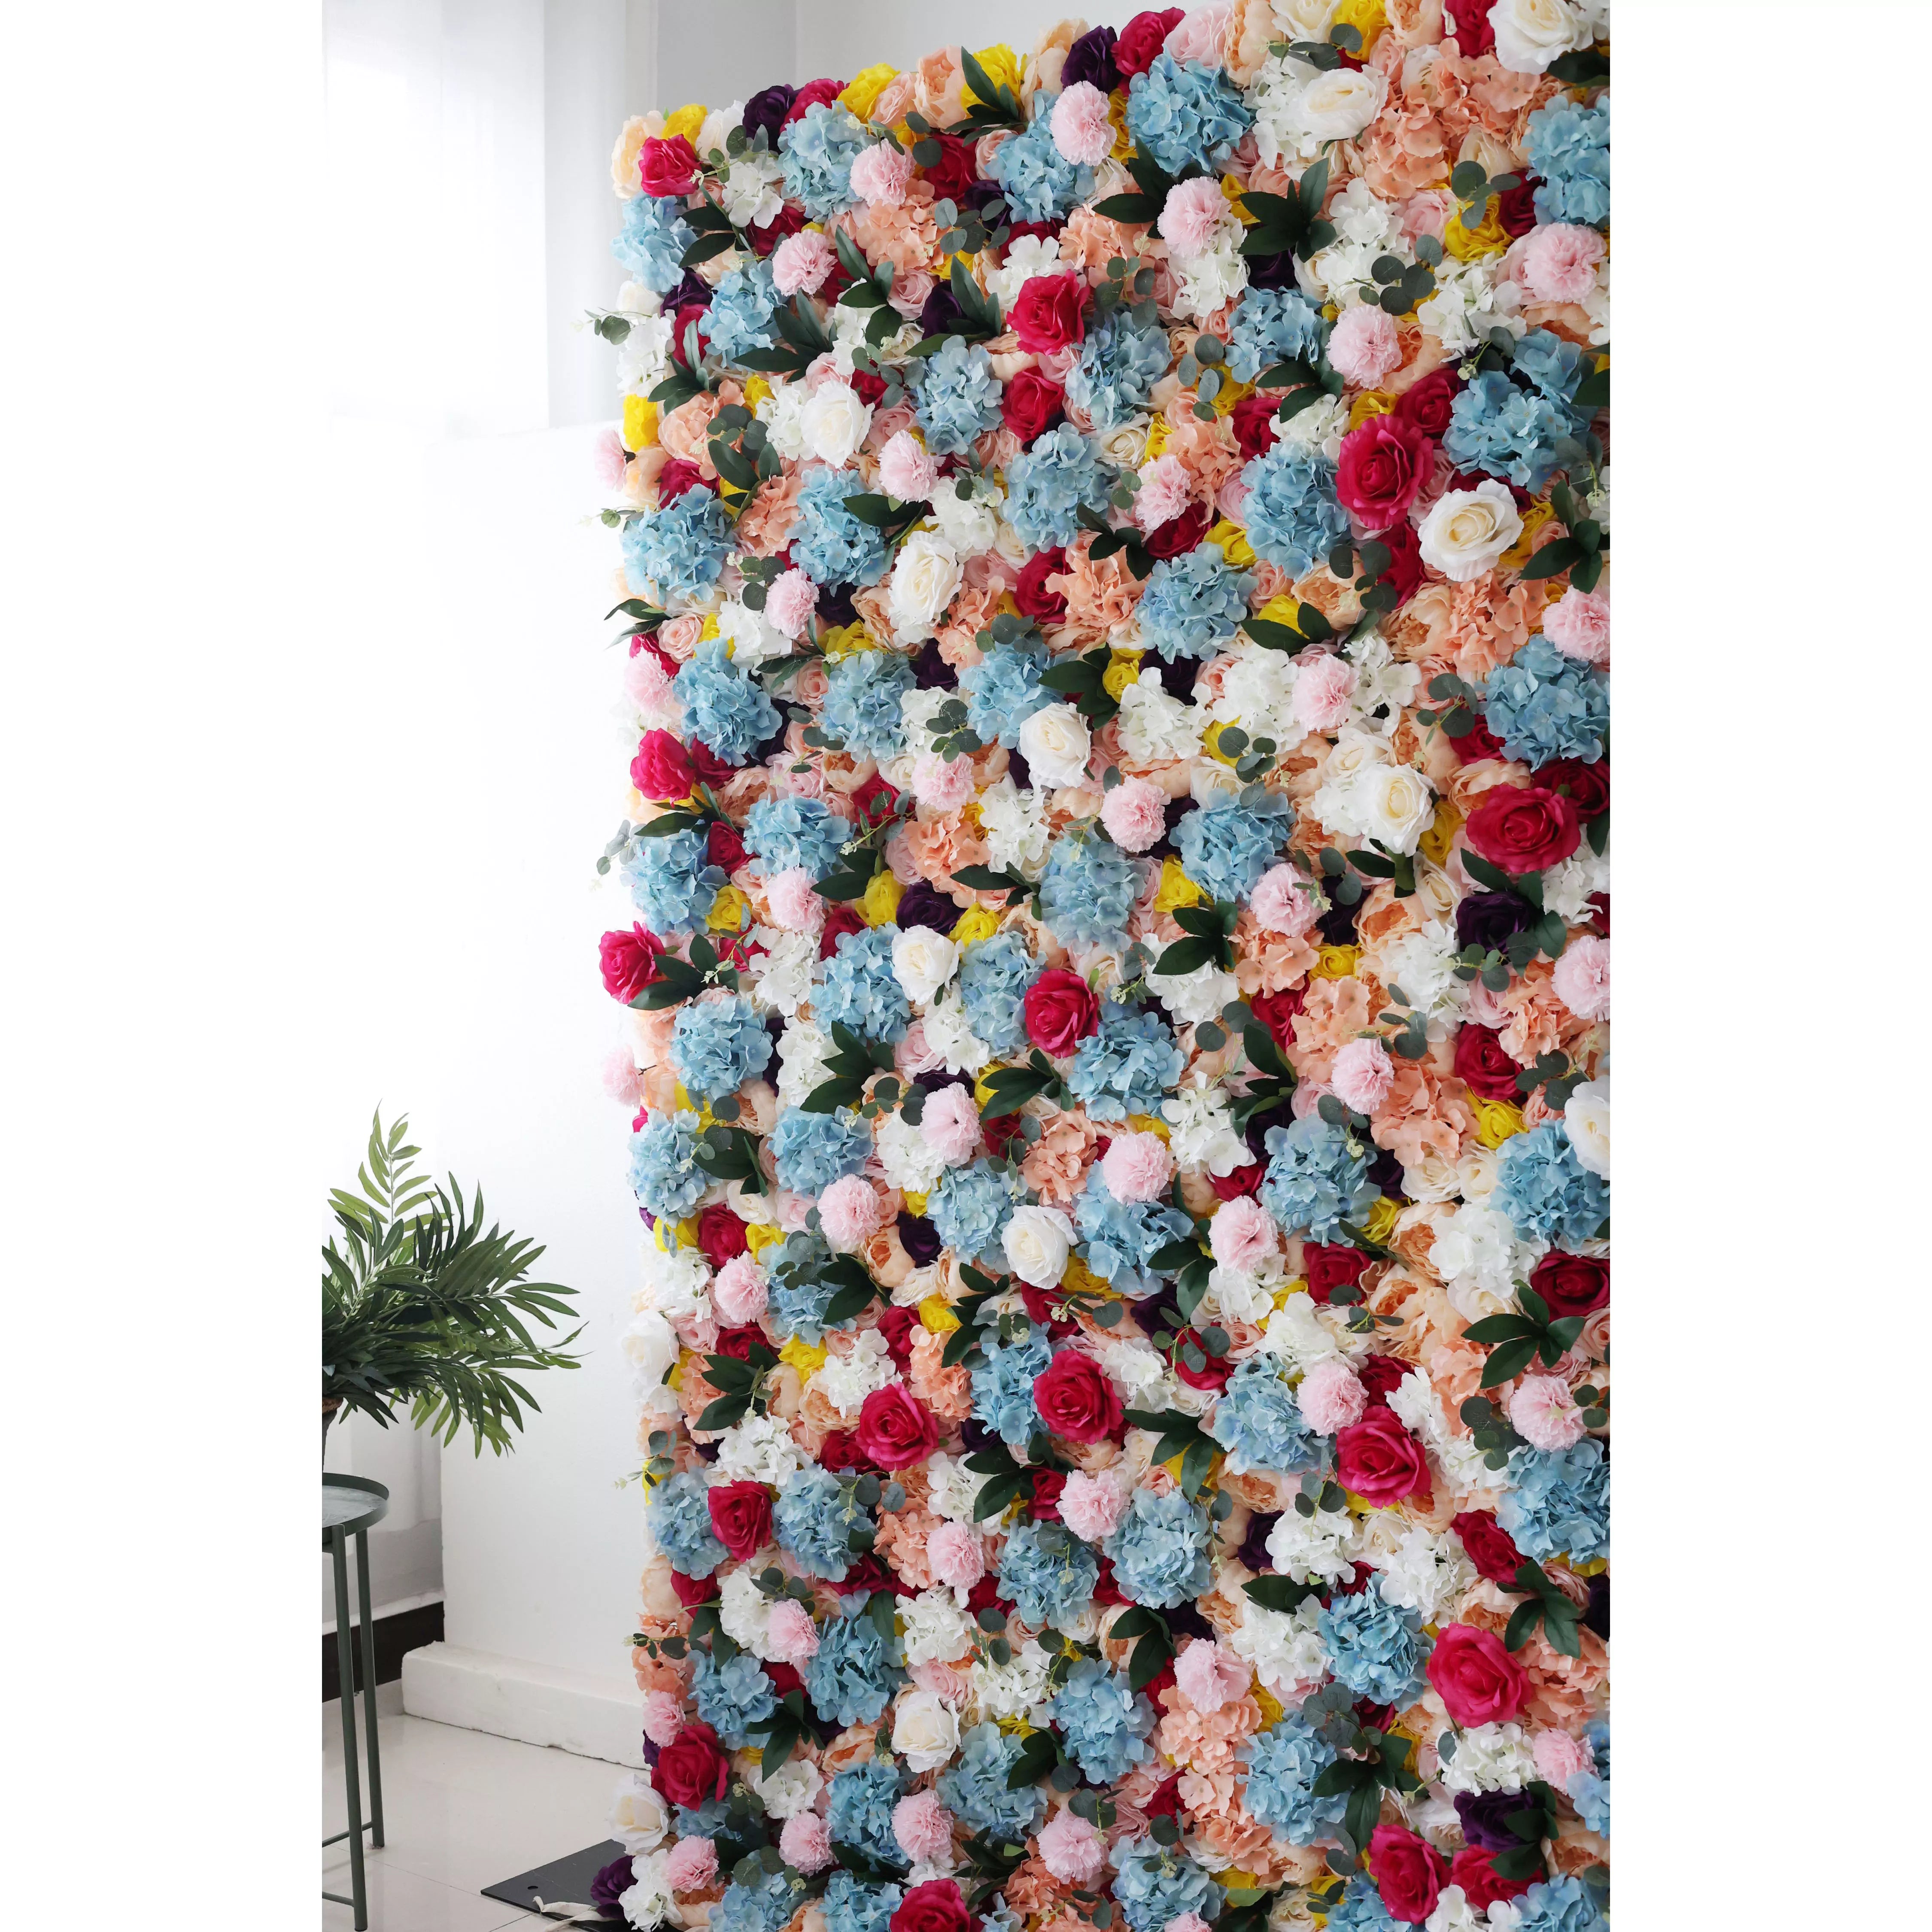 ValarFlower Artificial Floral Wall Backdrop: Blooming Spectrum - A Vibrant Symphony of Colors-VF-243